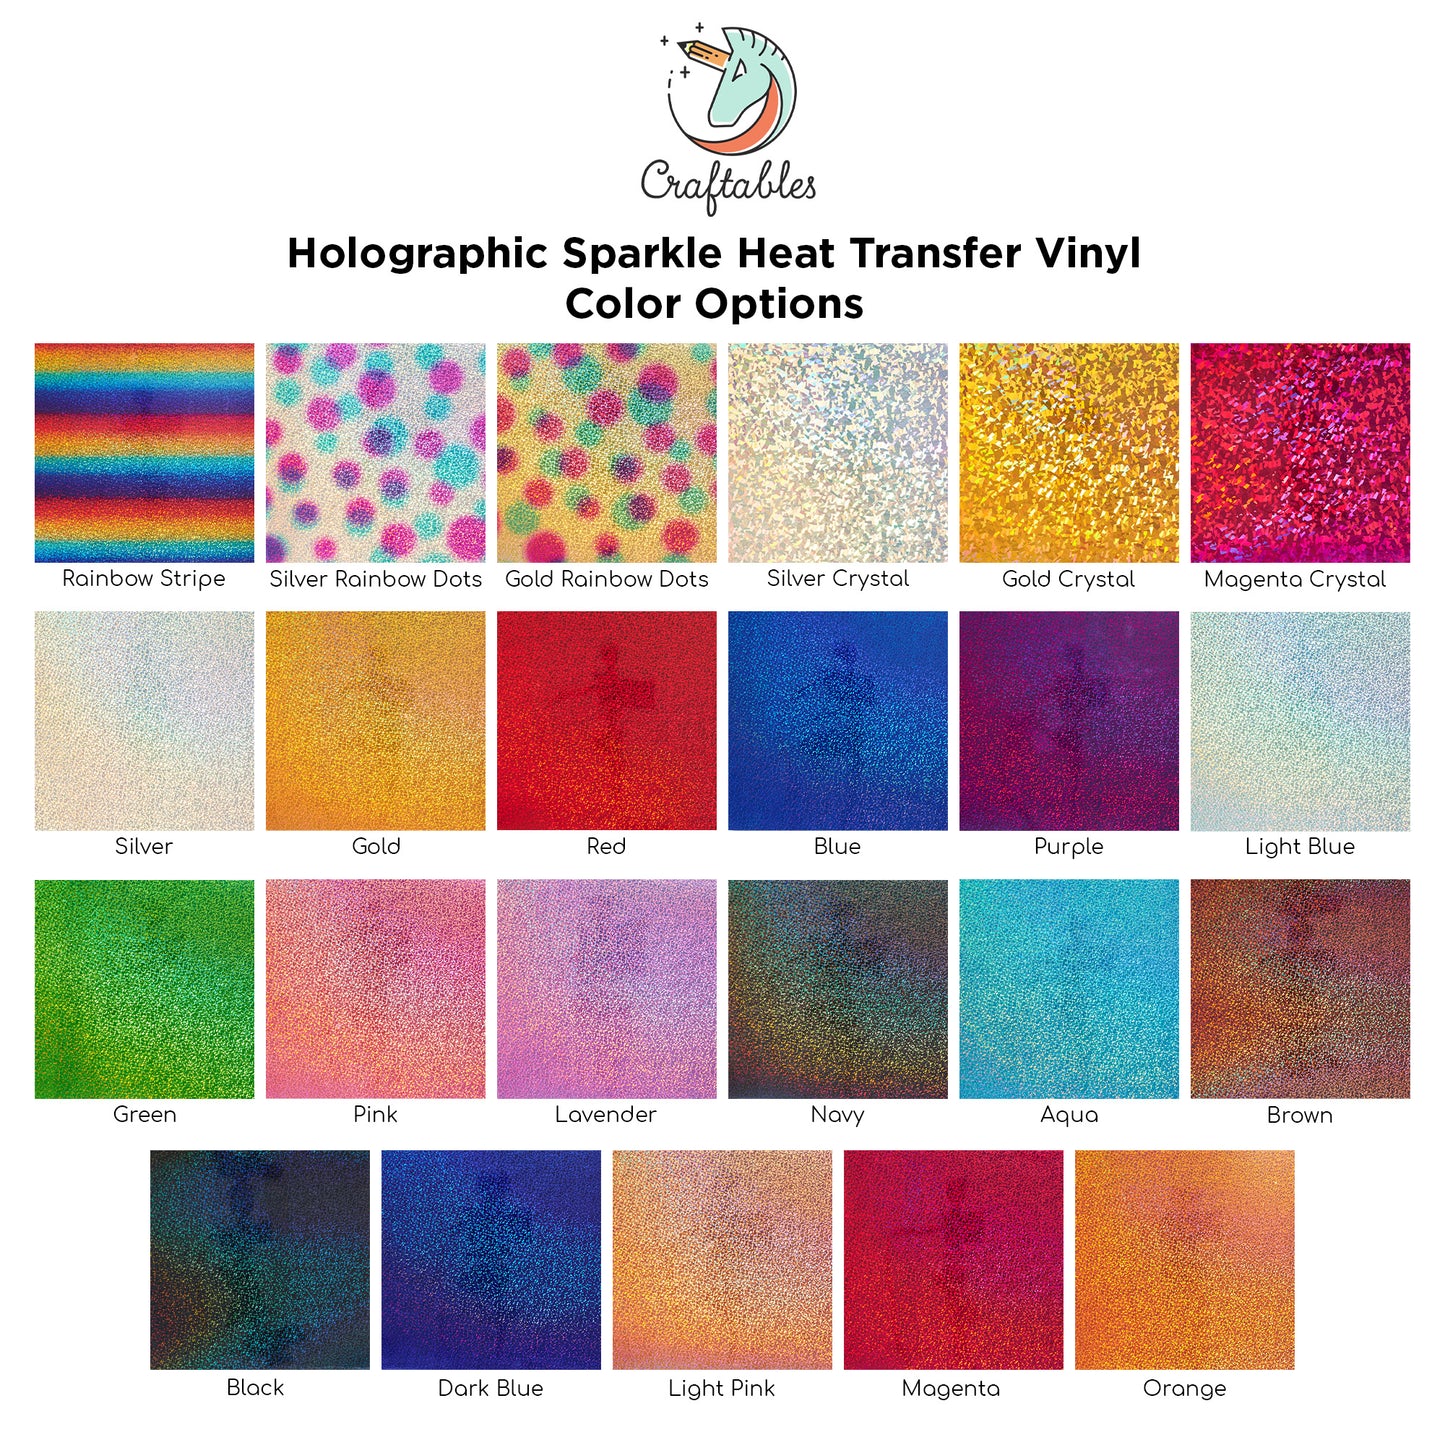 Navy Holographic Sparkle Heat Transfer Vinyl Rolls By Craftables